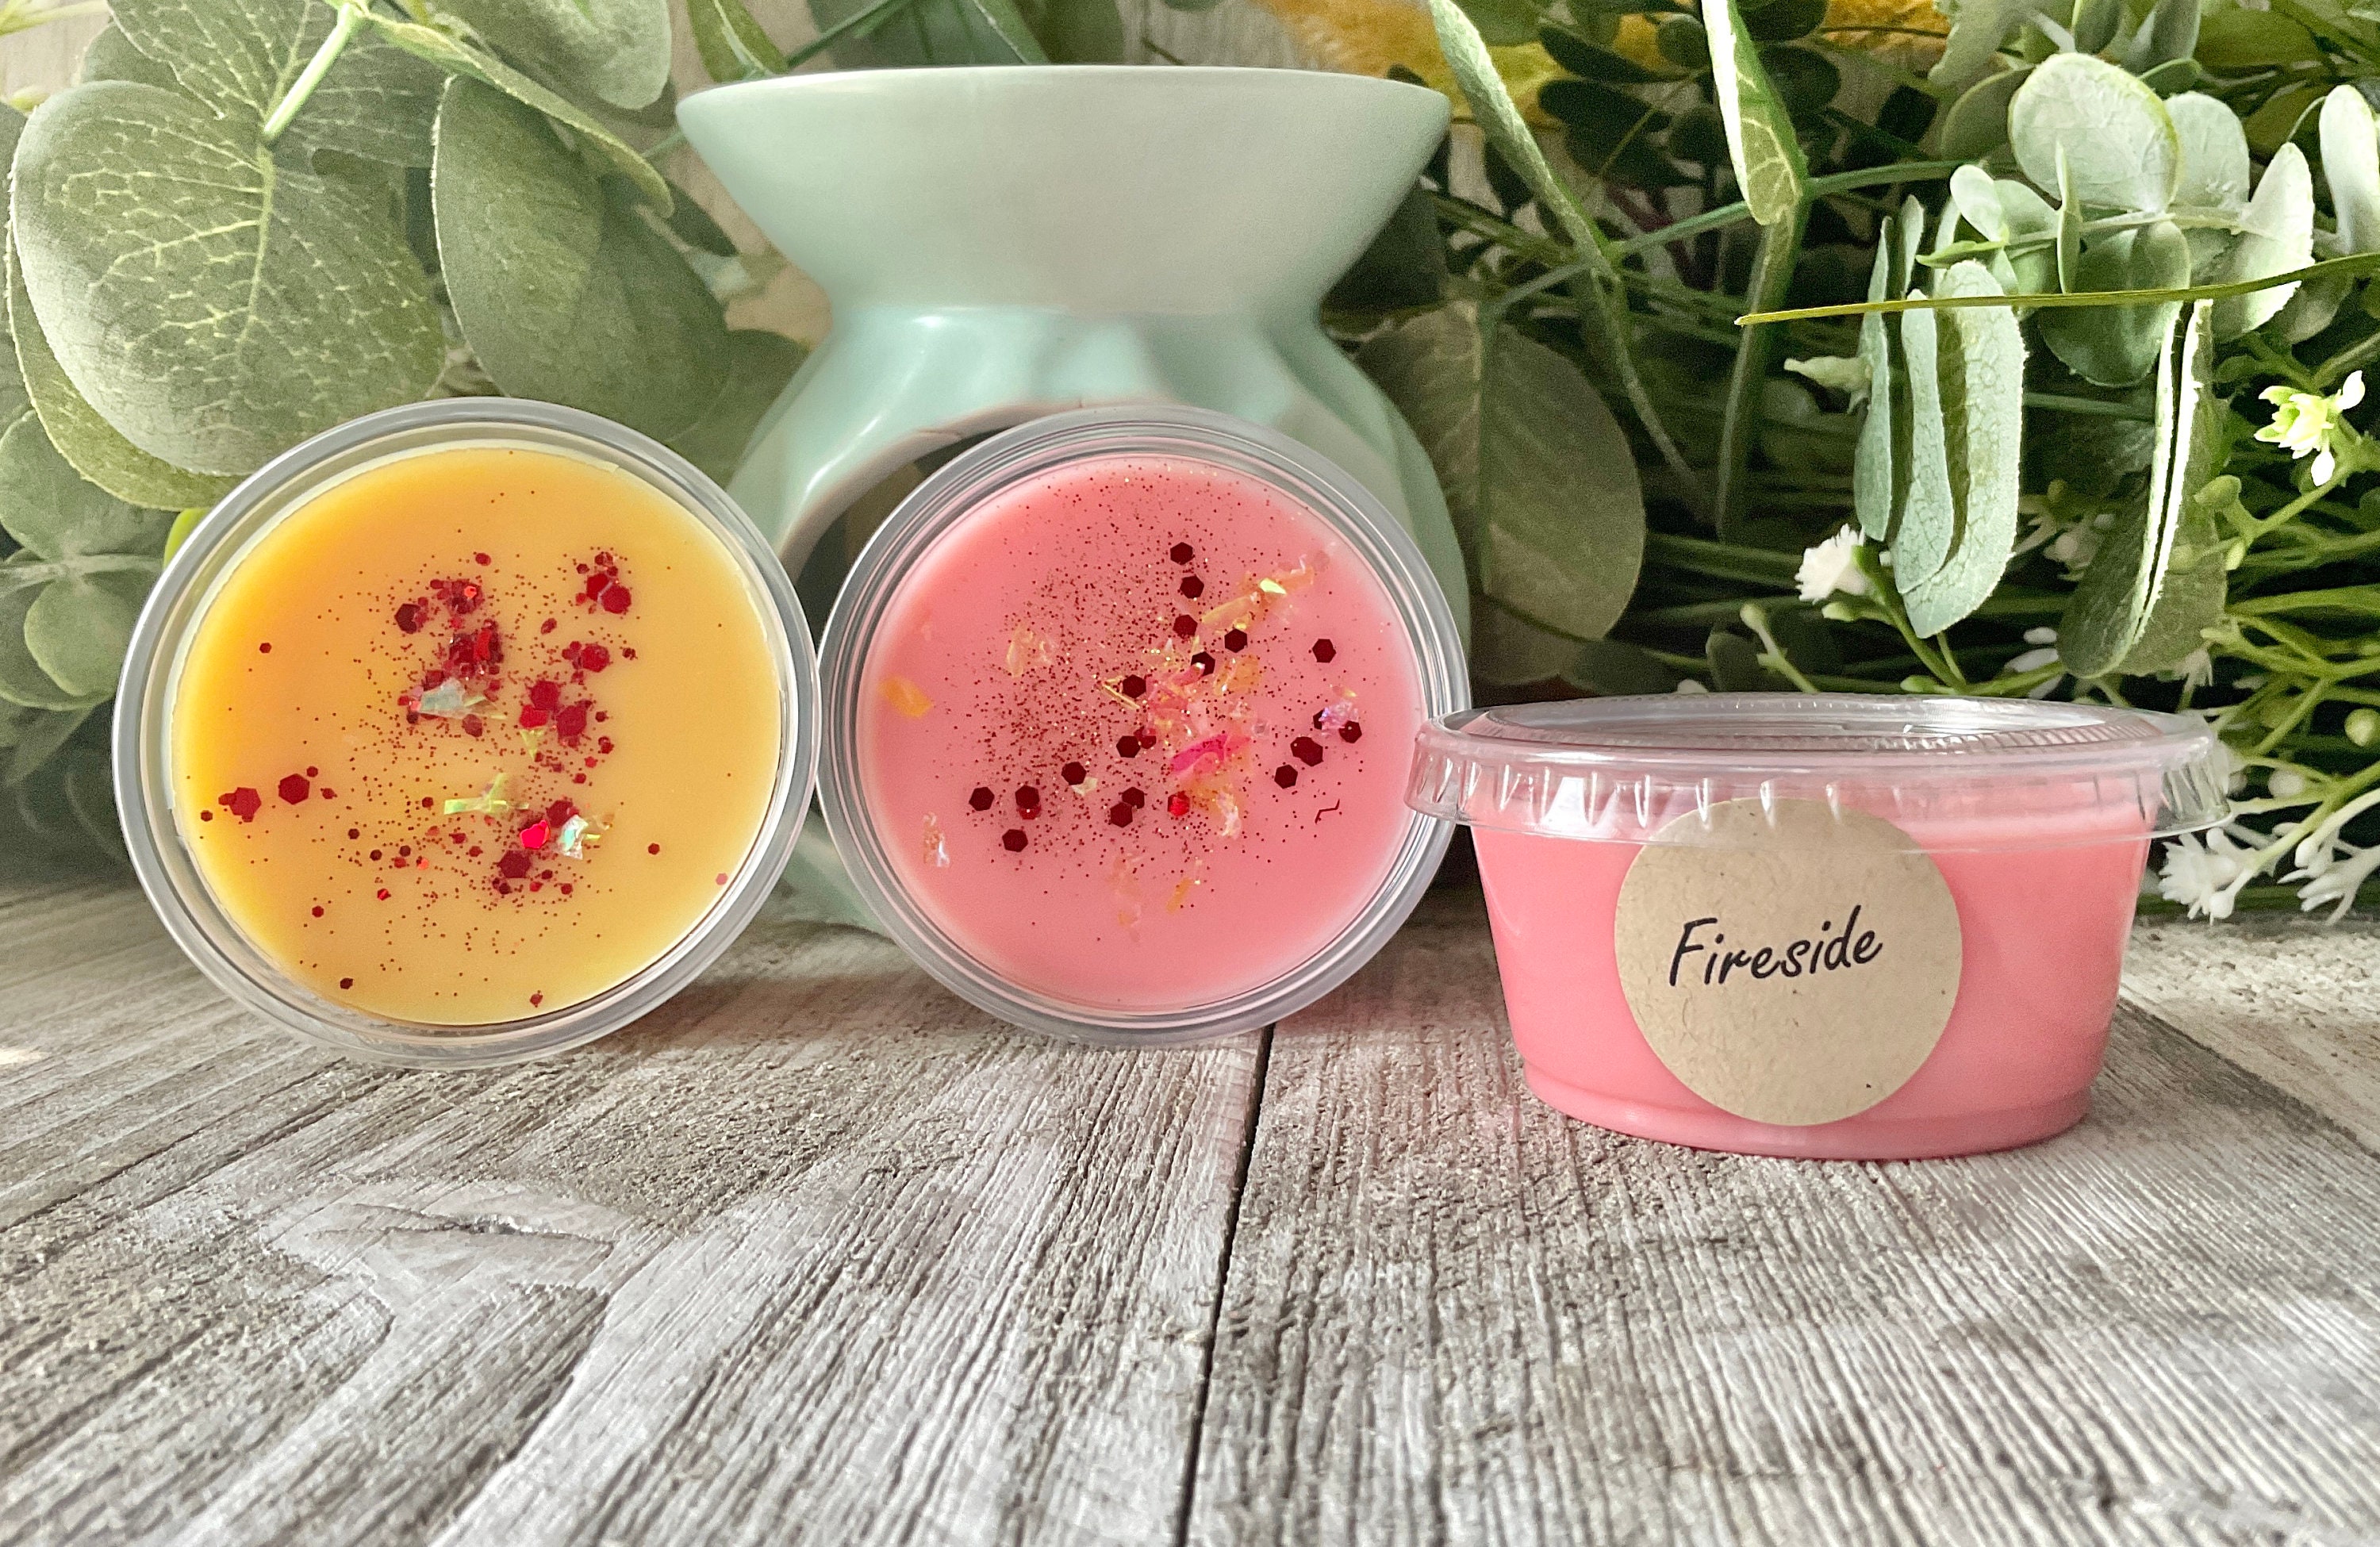 Fireside, 2 Oz Wax Melt Shot Cup With Glitter, Strong Scented Wax